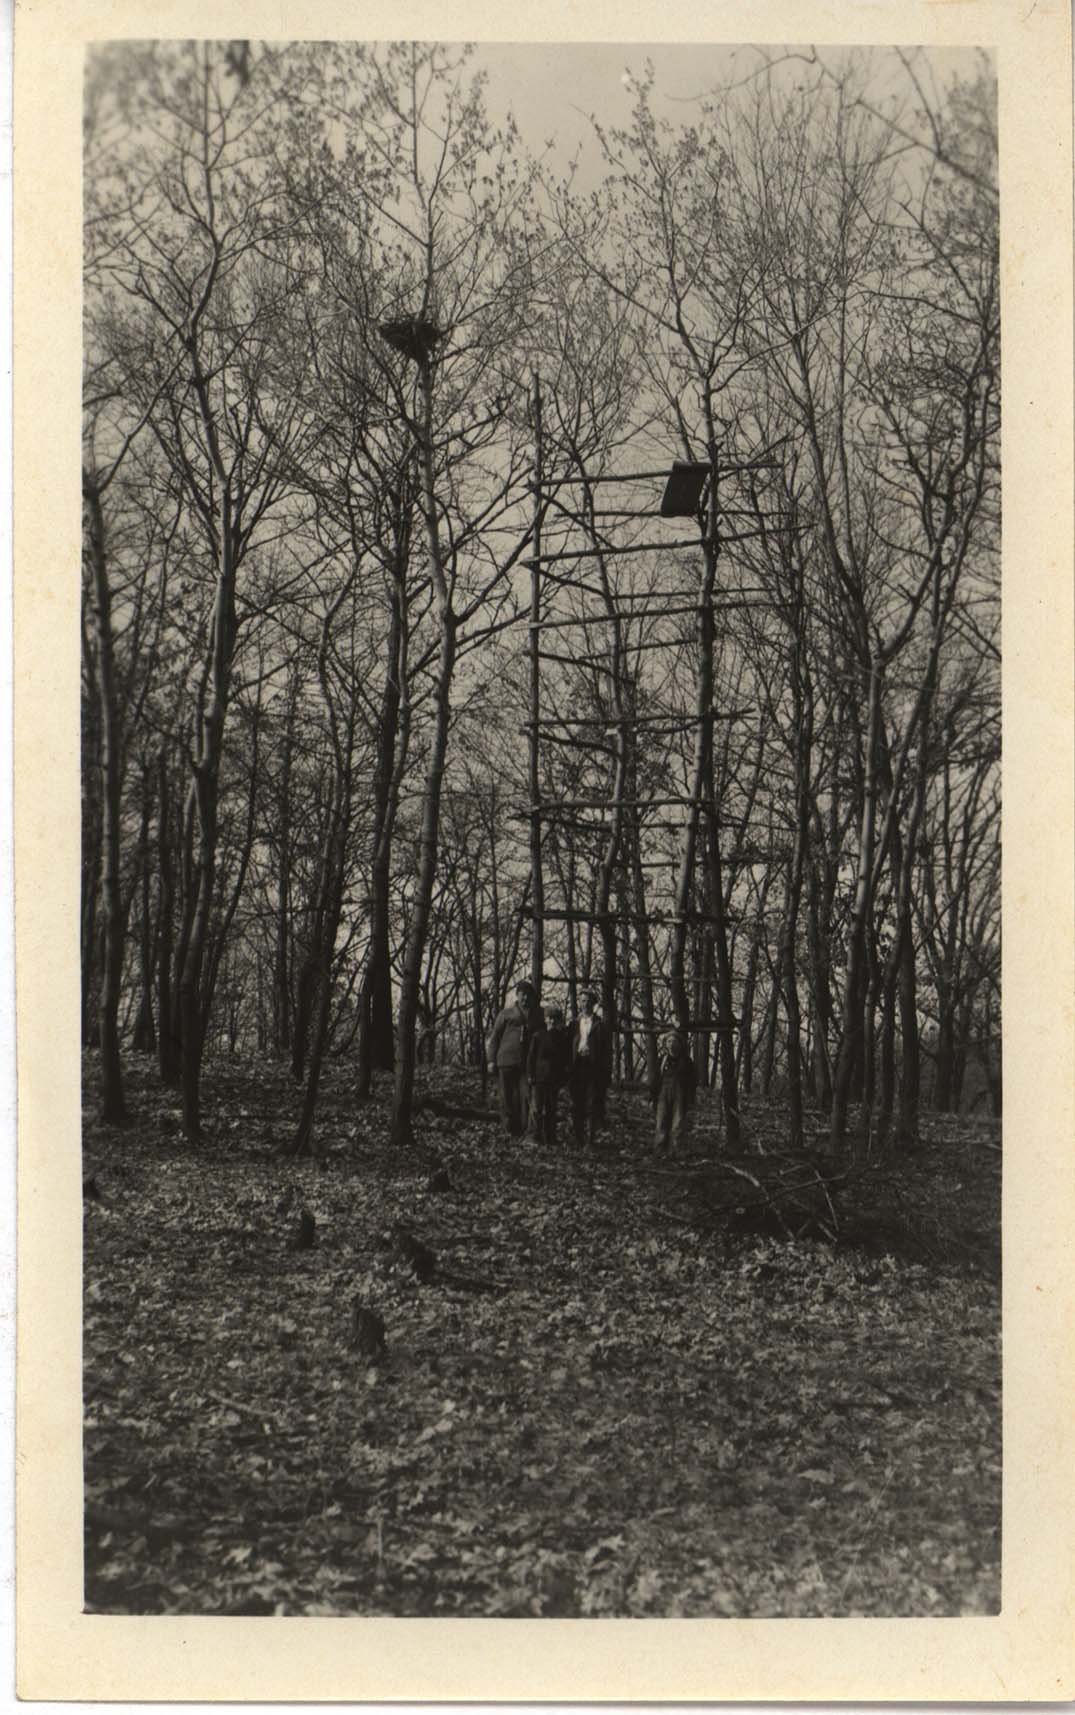 Photograph of an observation tower next to a tree with a Great Horned Owl nest